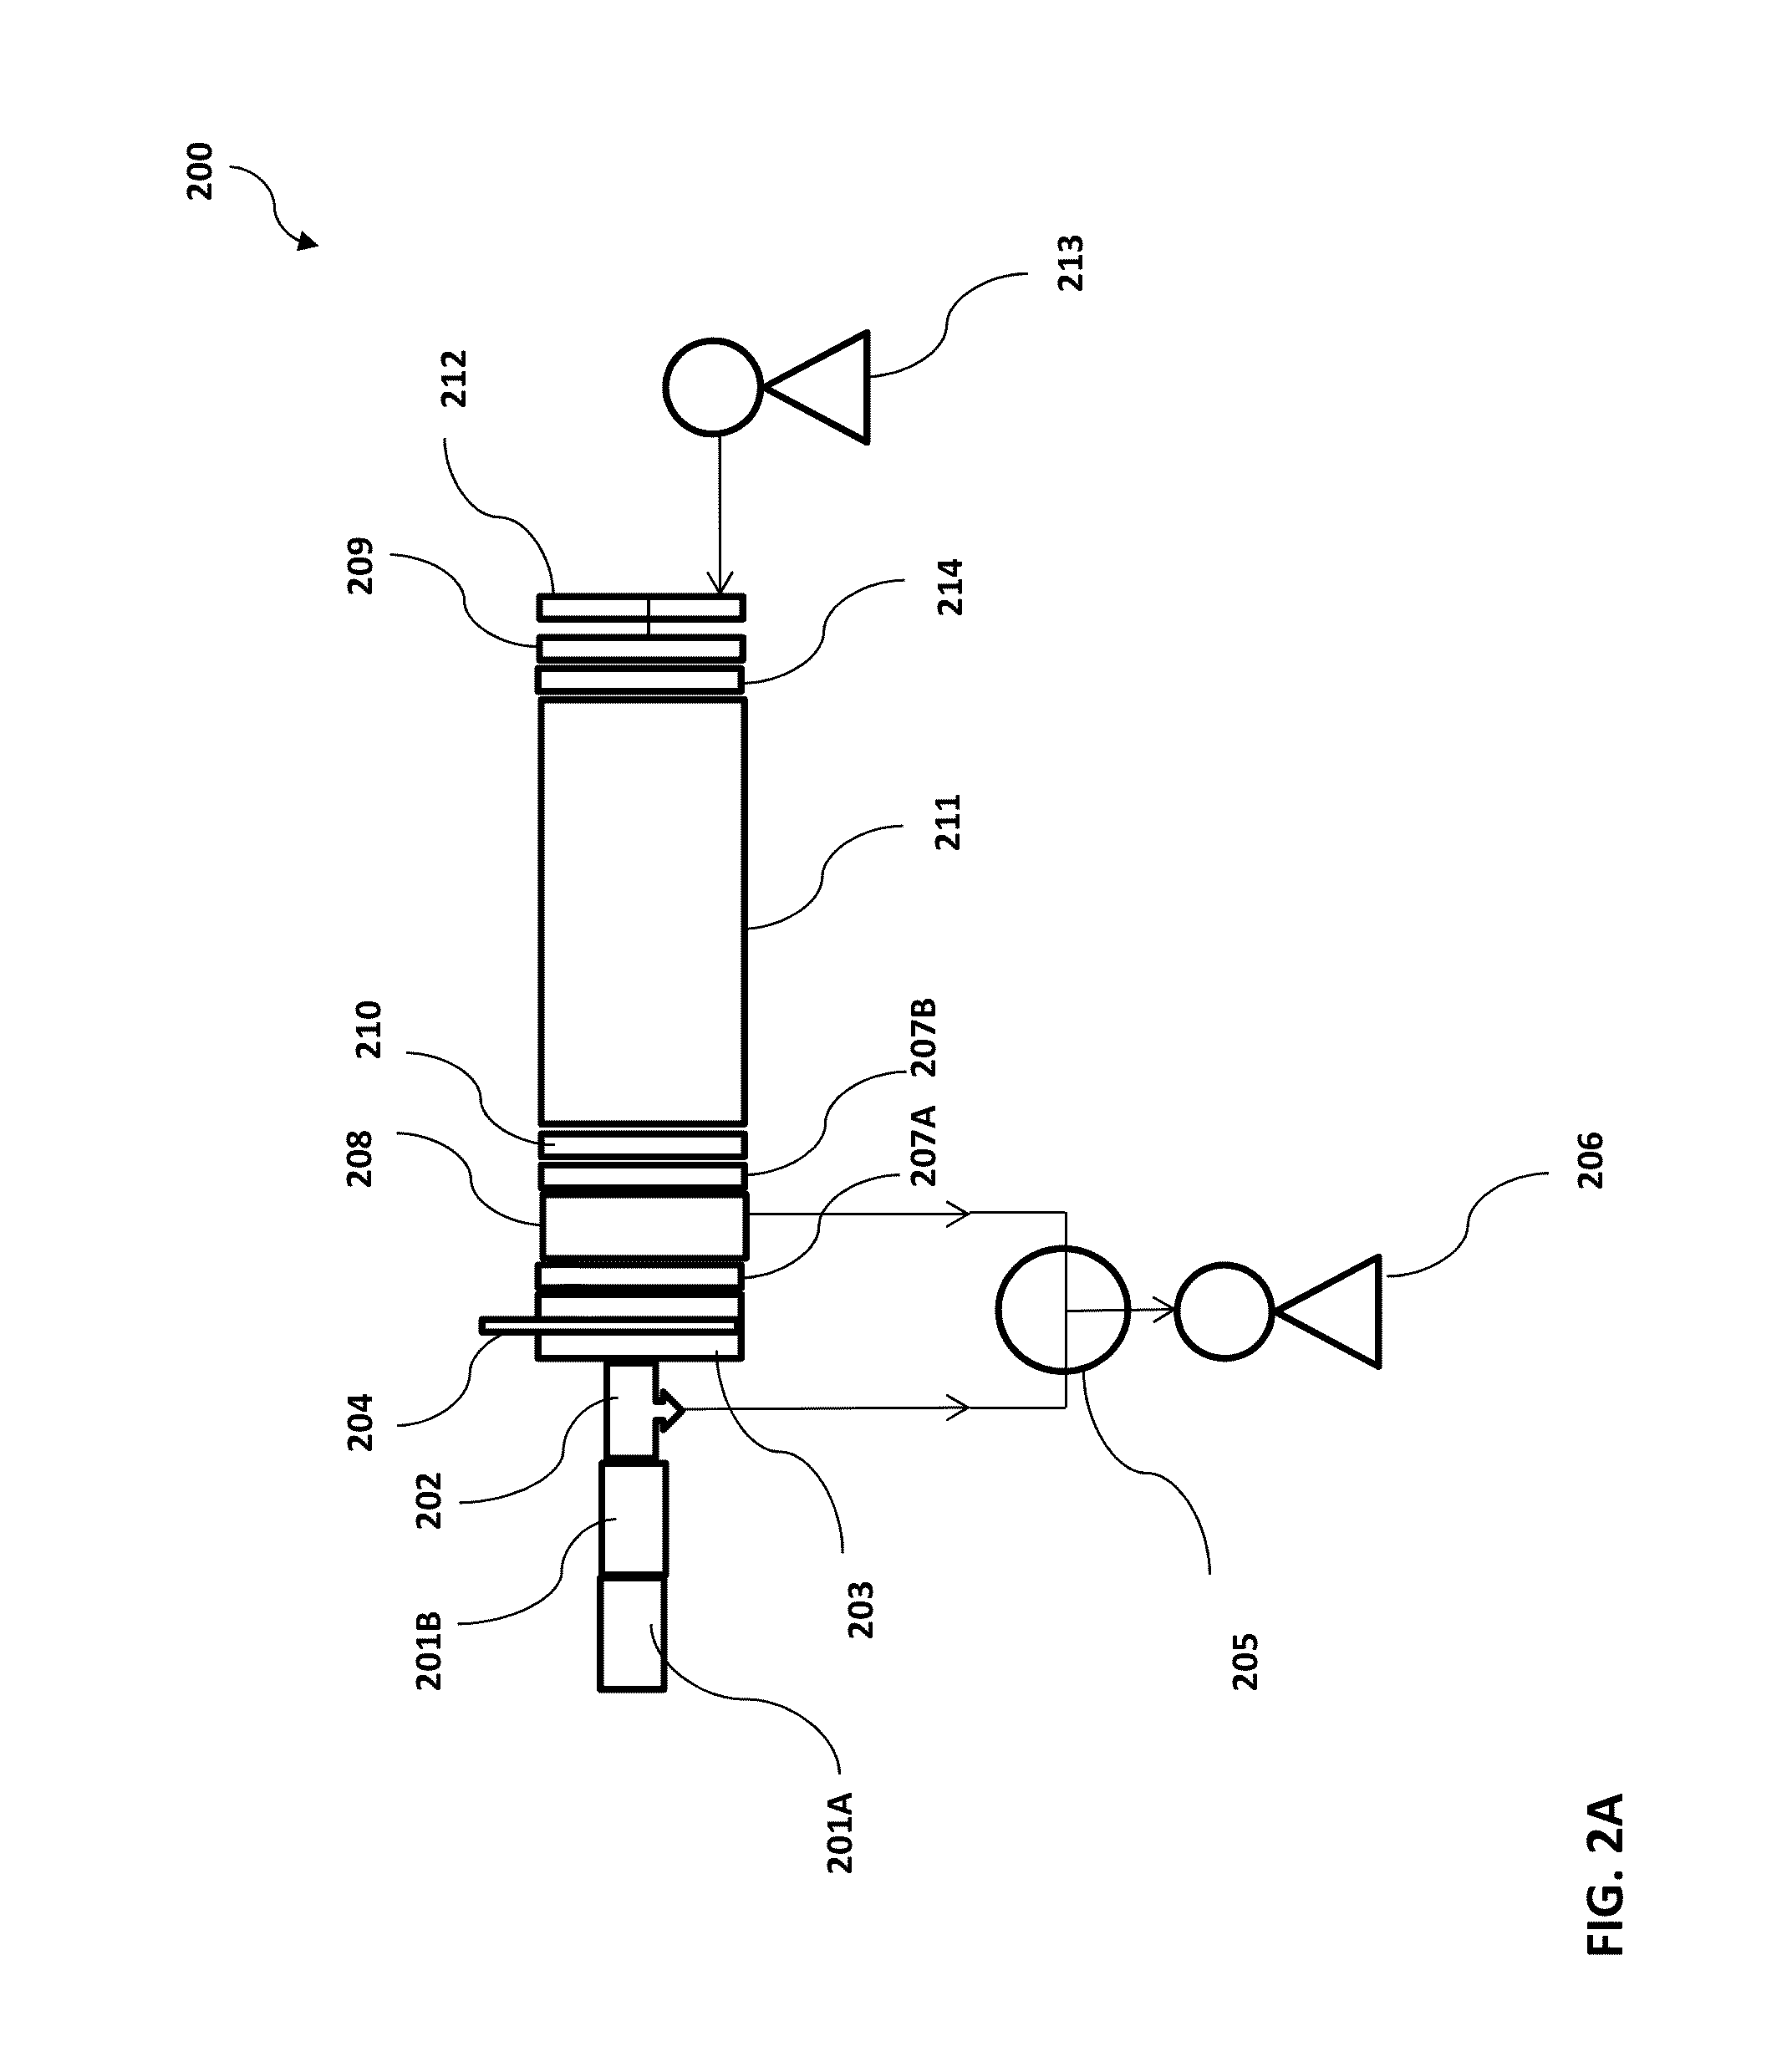 Detection apparatus and methods utilizing ion mobility spectrometry